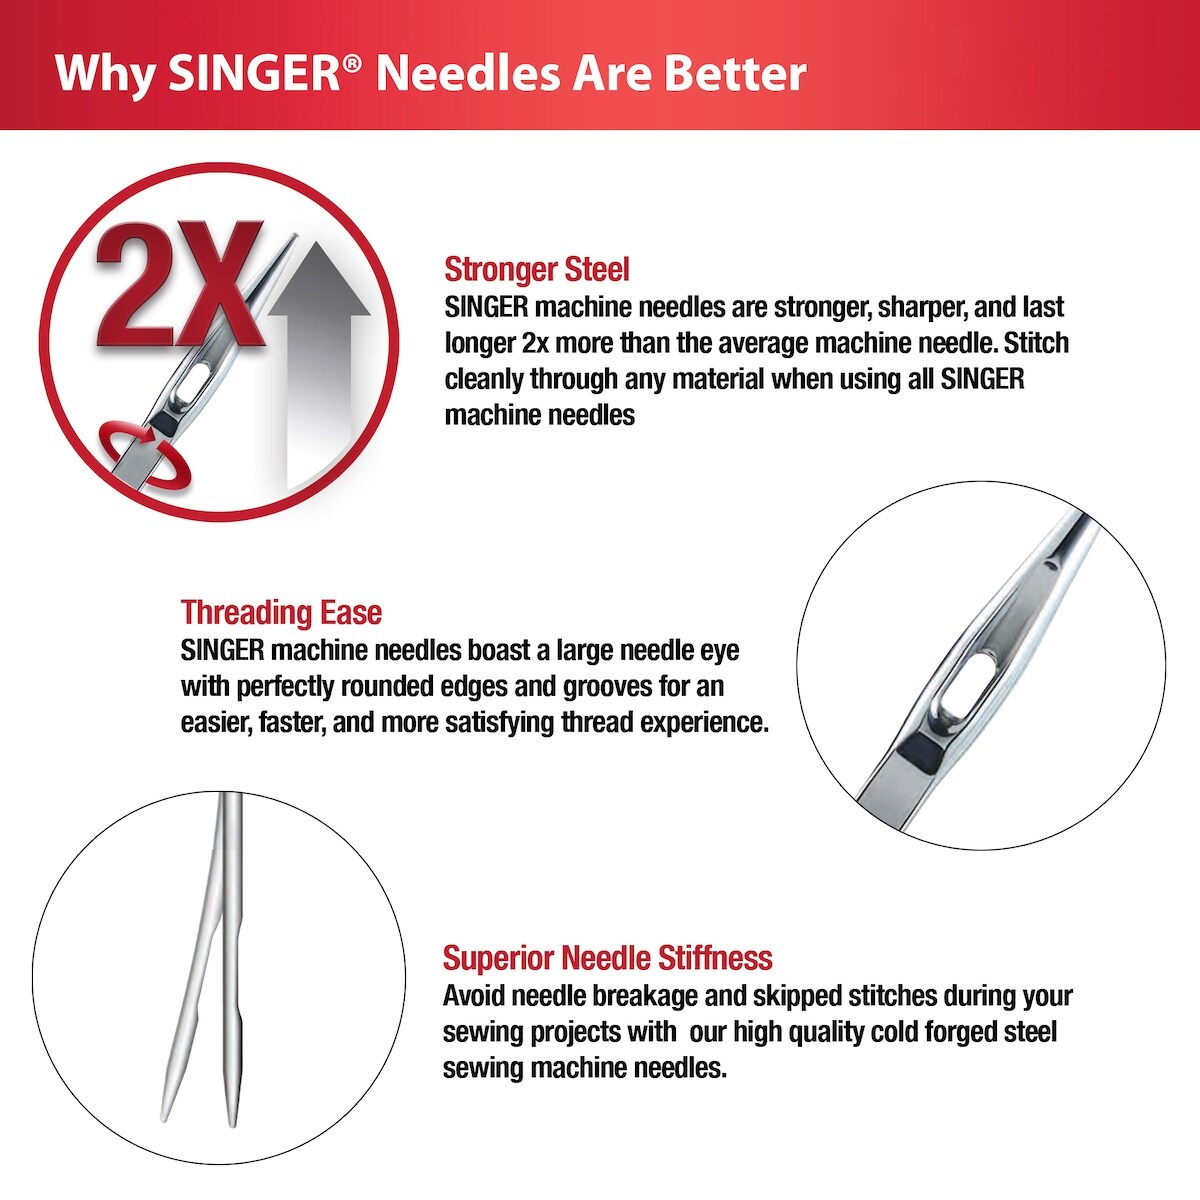 Singer Jeans Needles for All Home Machines